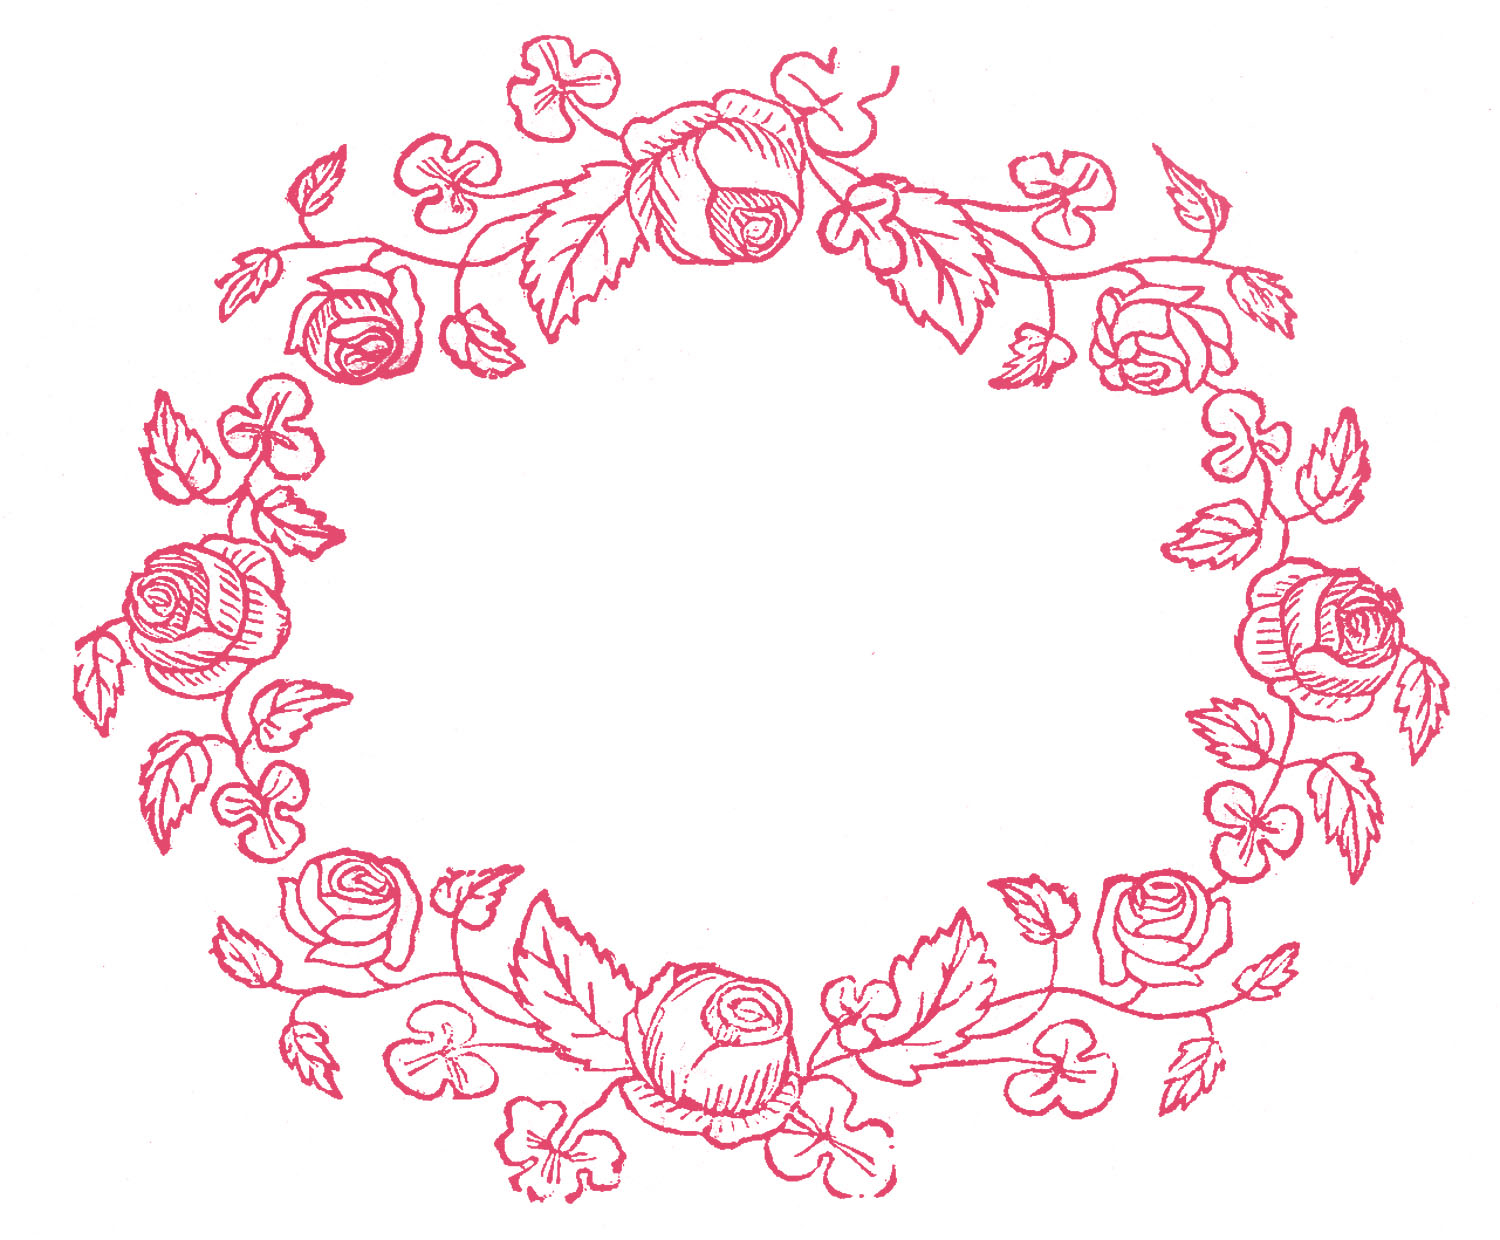 Rose Embroidery Pattern Royalty Free Images Rose Wreaths Embroidery Pattern The